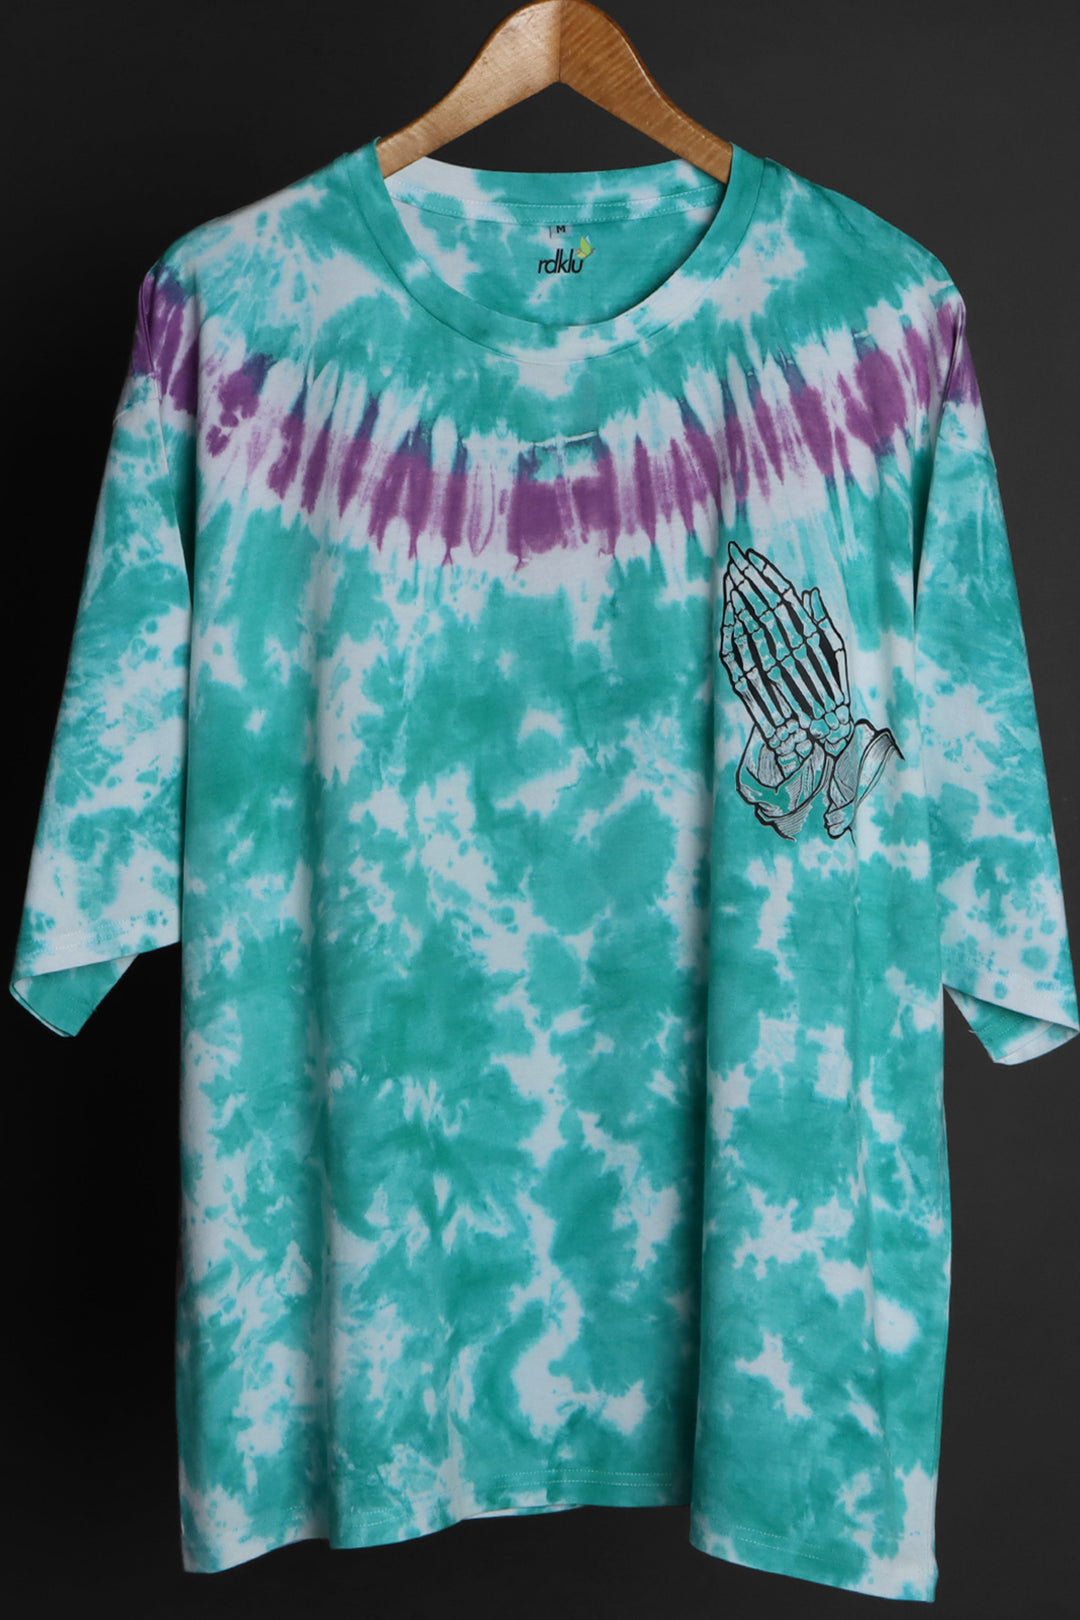 Printed Oversized Tee - MEN'S PRINTED OVER SIZE TEE#31